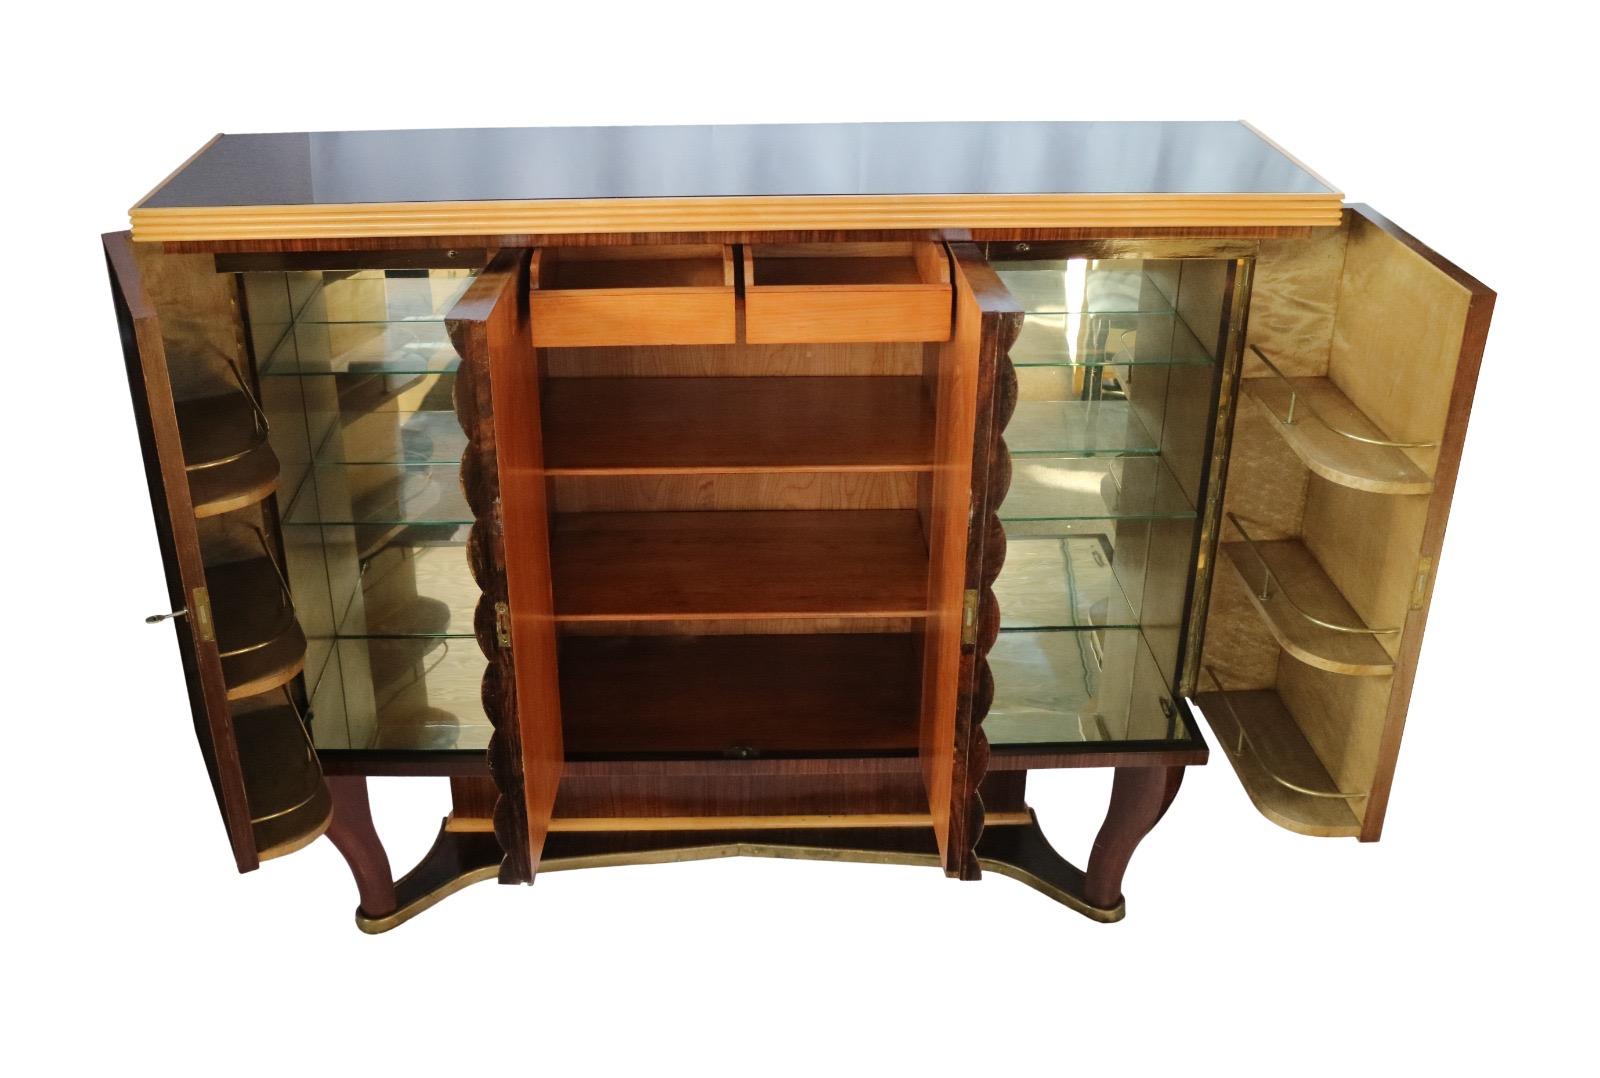 Elegant Italian Art Deco Dry Bar Cabinet by Michele Merighi 1940 In Excellent Condition For Sale In Rome, IT